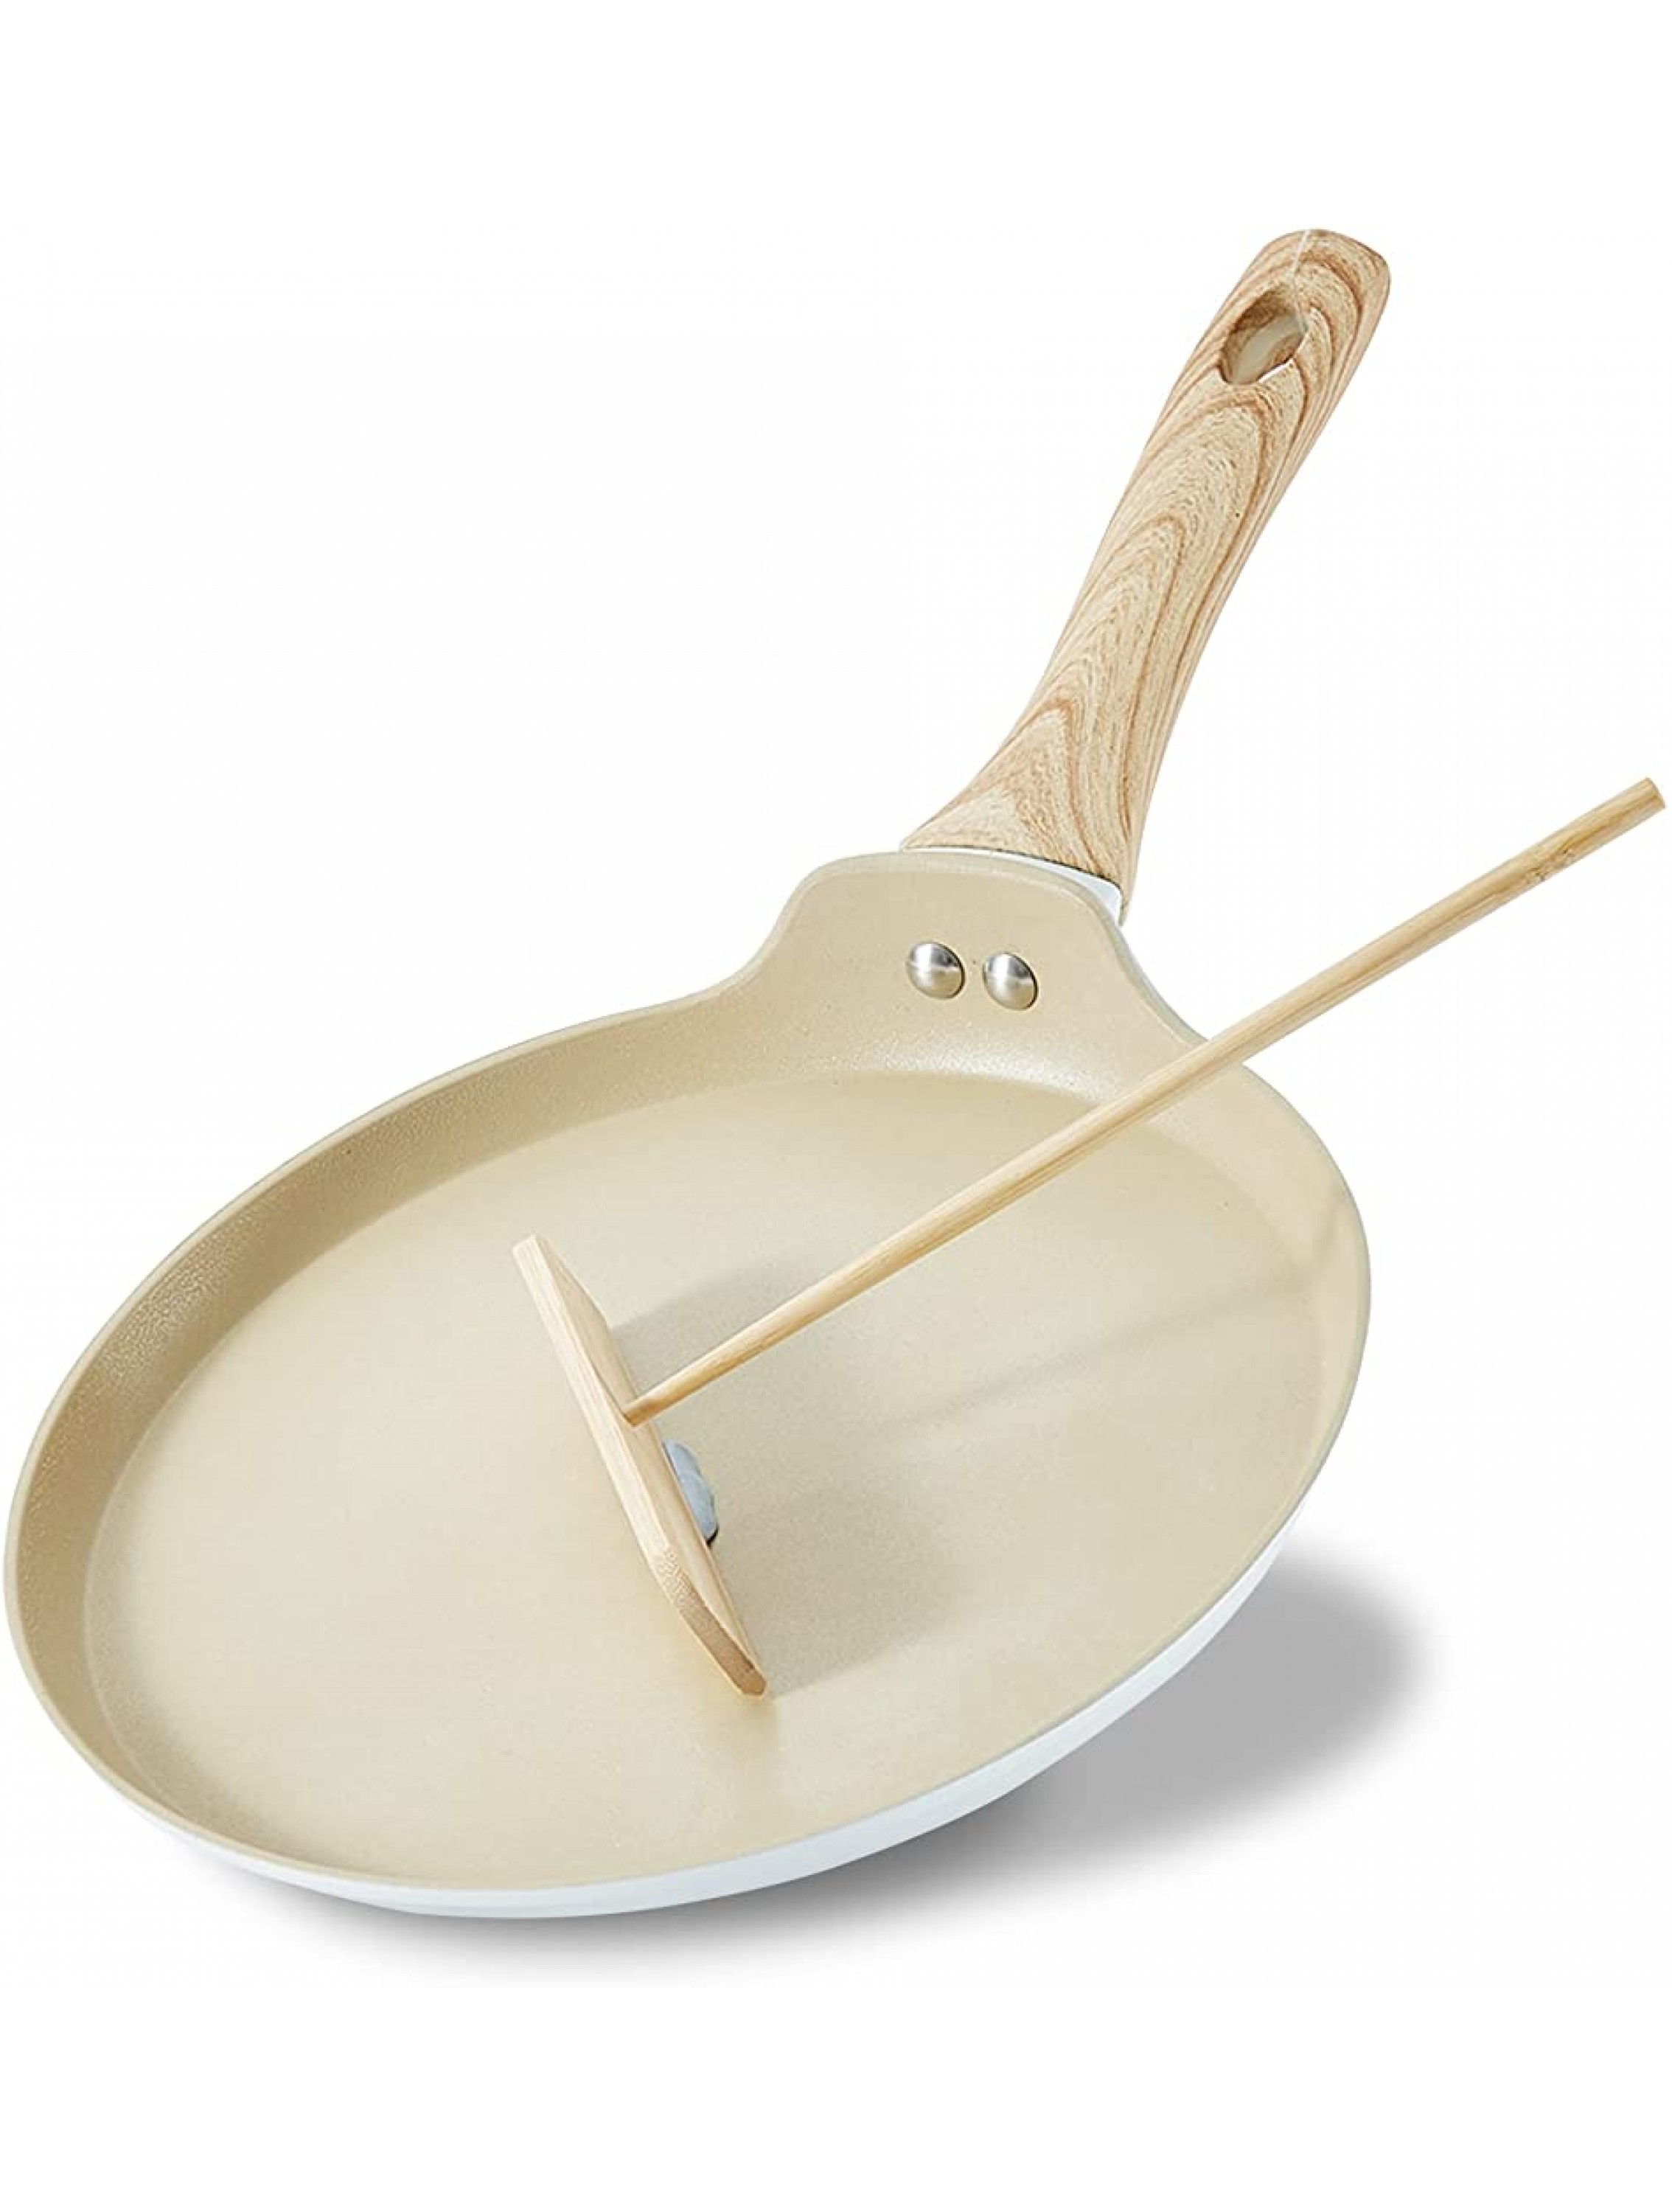 ROCKURWOK Crepe Pan Ceramic Nonstick Pancake Pan with Detachable Solid Wood Handle 11 Frying Skillet Griddle White - B3DFANKL8